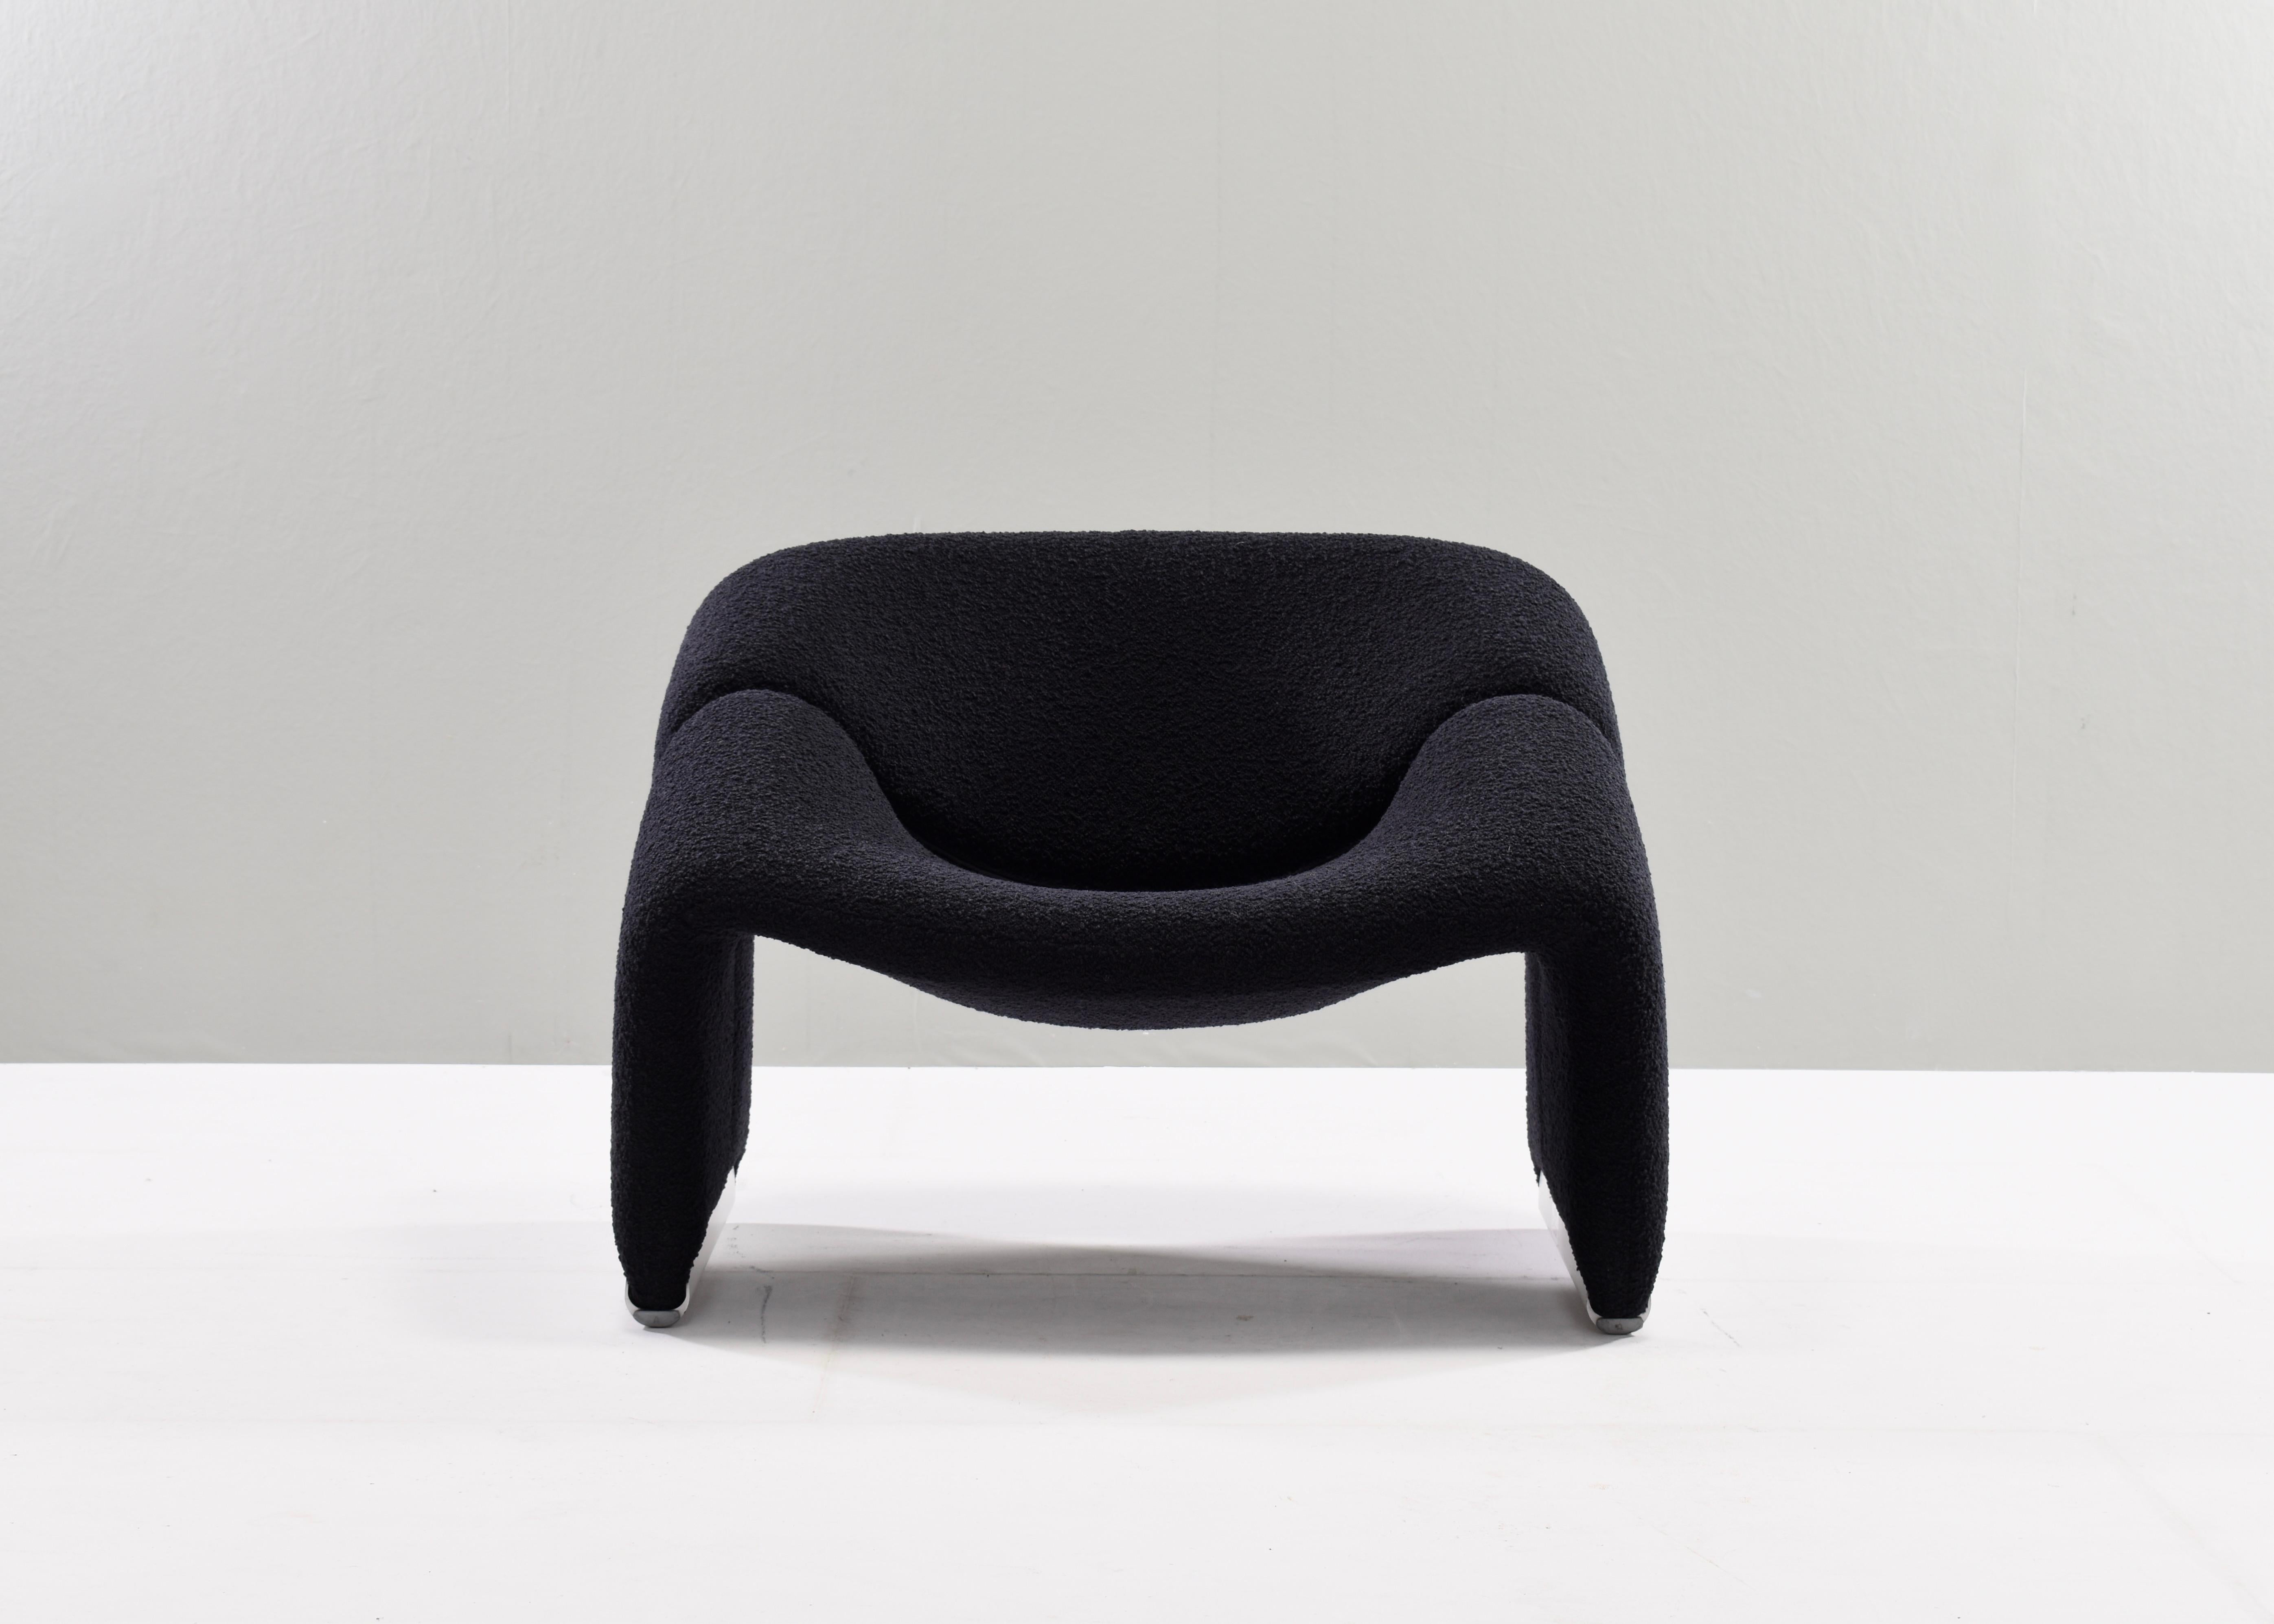 F598 ‘Groovy’ 'M' lounge chair by Pierre Paulin for Artifort in new bouclé wool/cotton fabric from Paris, France.
The price is per chair.
We have more chairs available.
The chair has been re-upholstered in a beautiful black bouclé wool/cotton